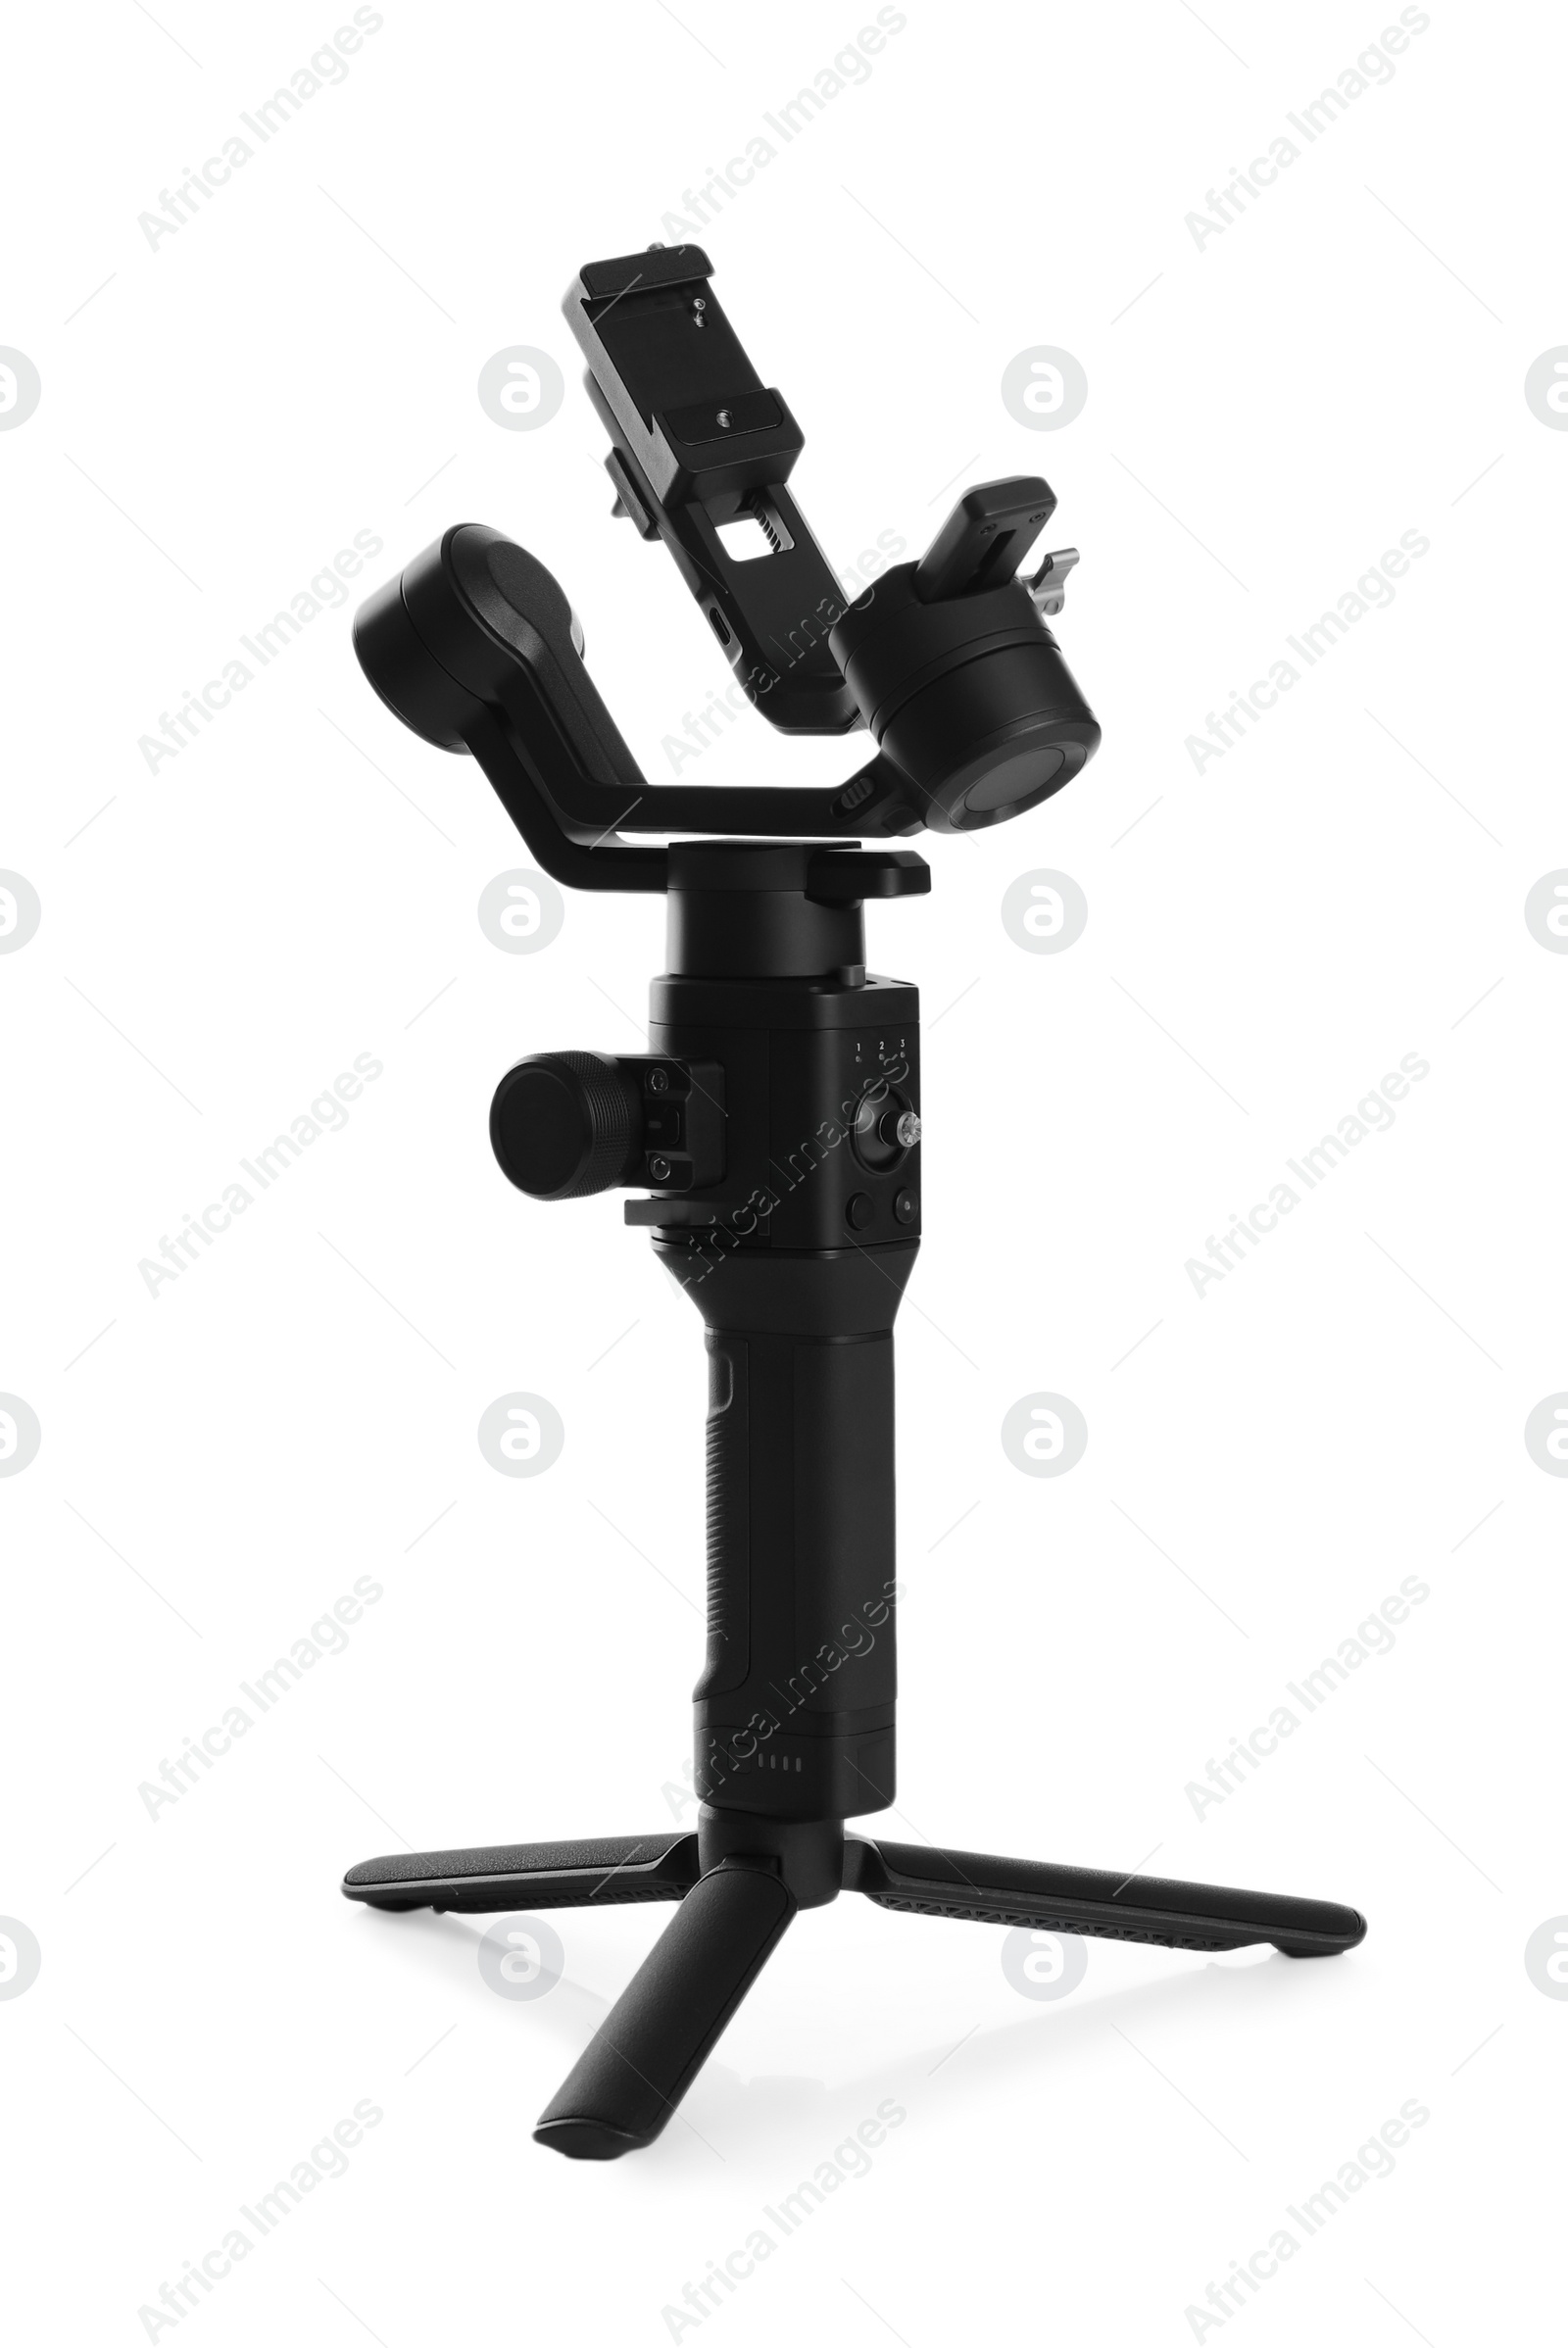 Photo of Modern stabilizer for video camera isolated on white